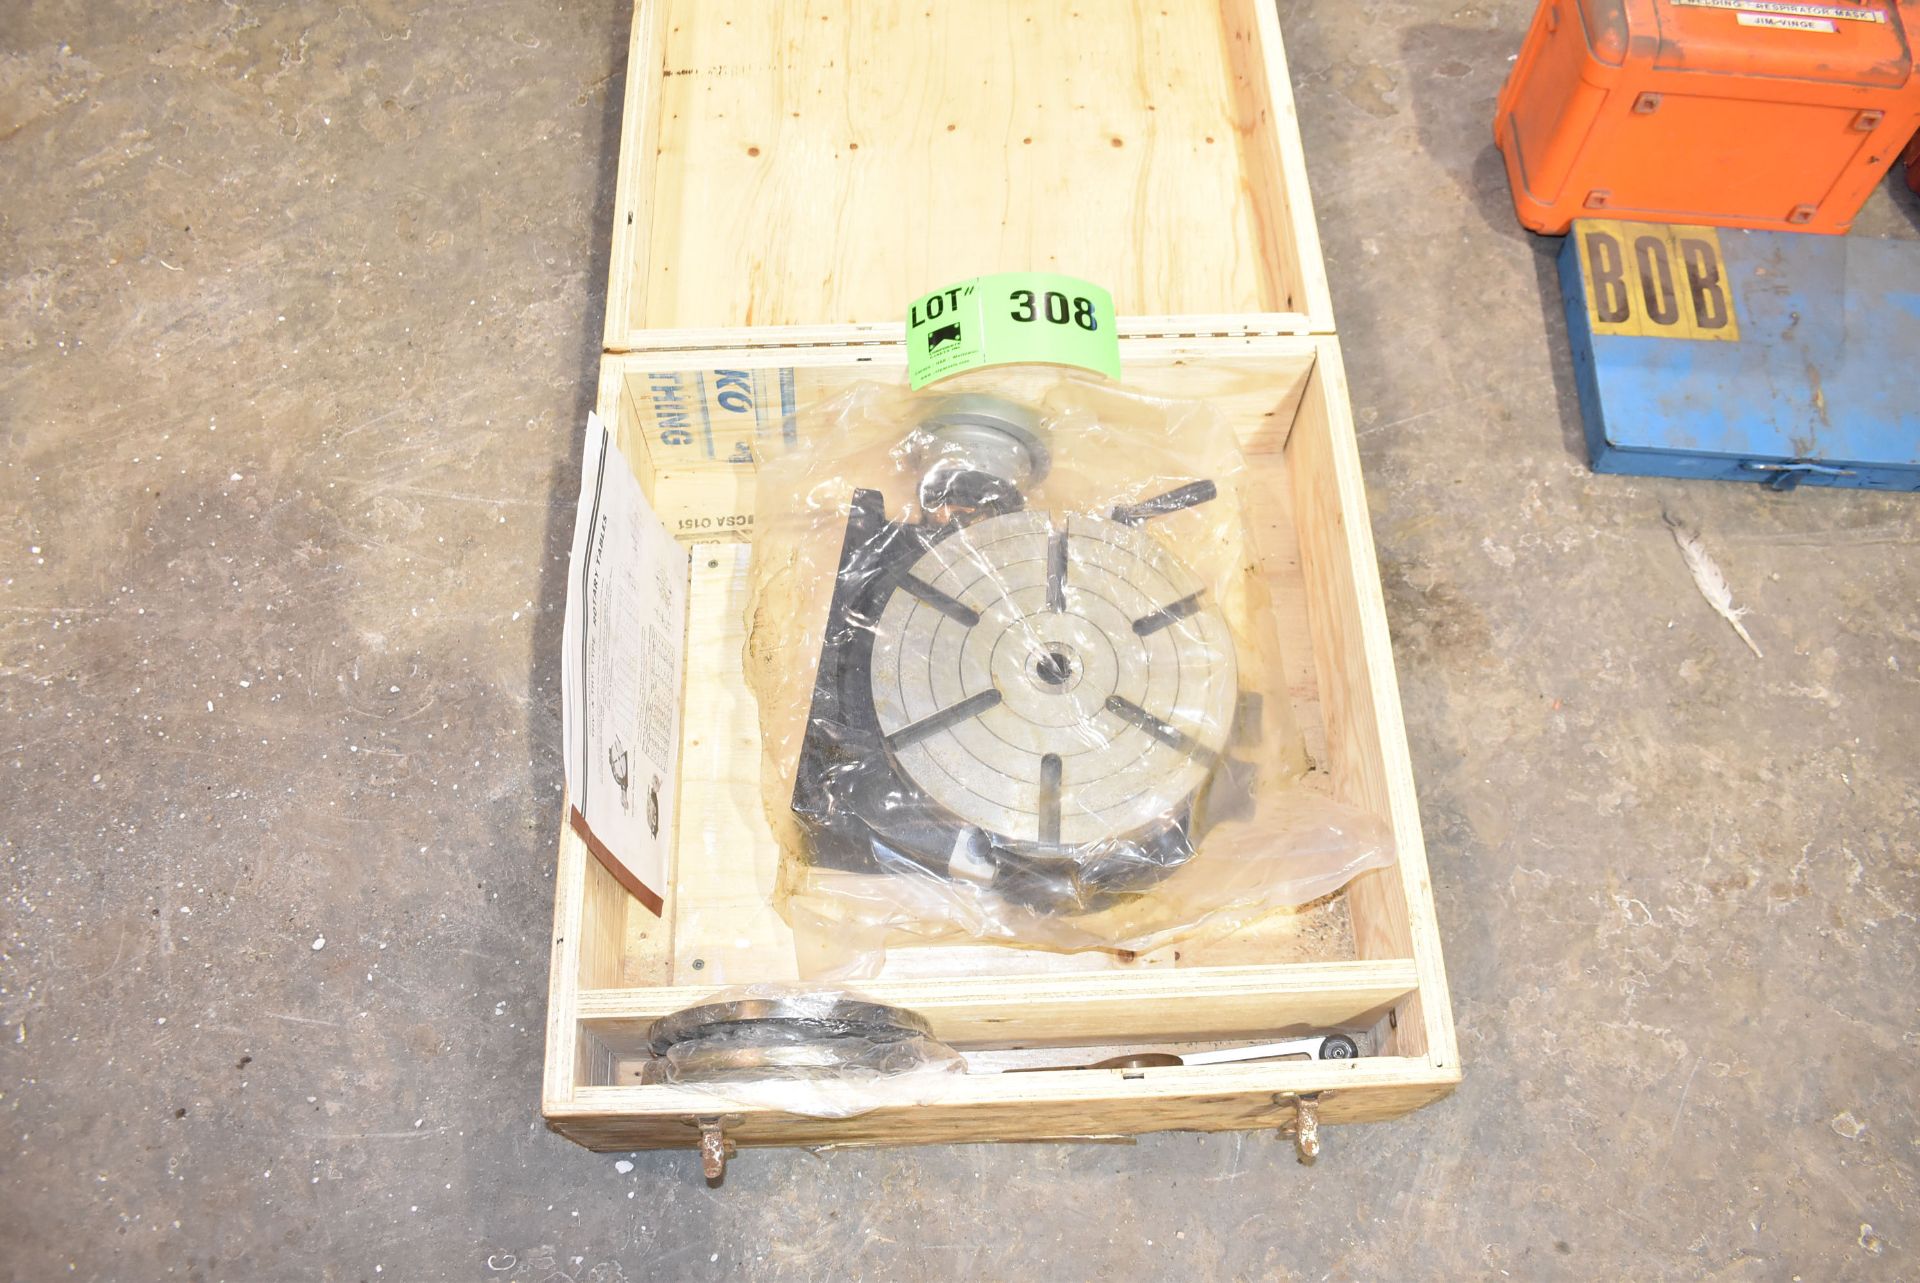 THV 10" ROTARY TABLE S/N N/A [RIGGING FEE FOR LOT #308 - $30 CAD PLUS APPLICABLE TAXES]